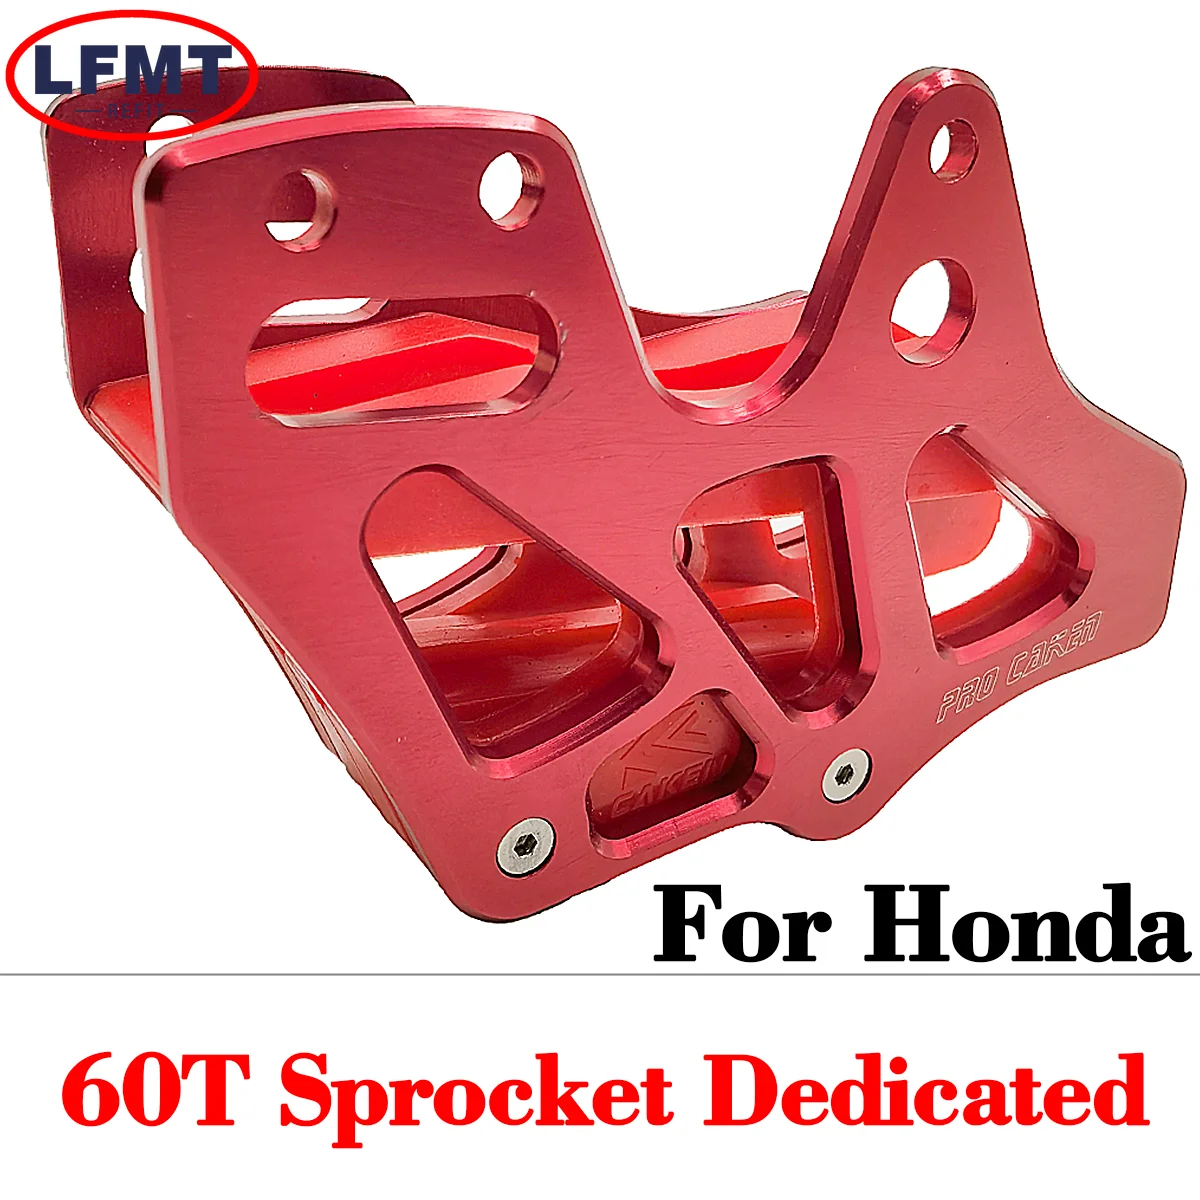 

Motocross 60T Sprocket Dedicated Chain Guide Guard Protection For Honda CRF250R CRF450R CRF250X CRF450X CRF 250 450 R X RX